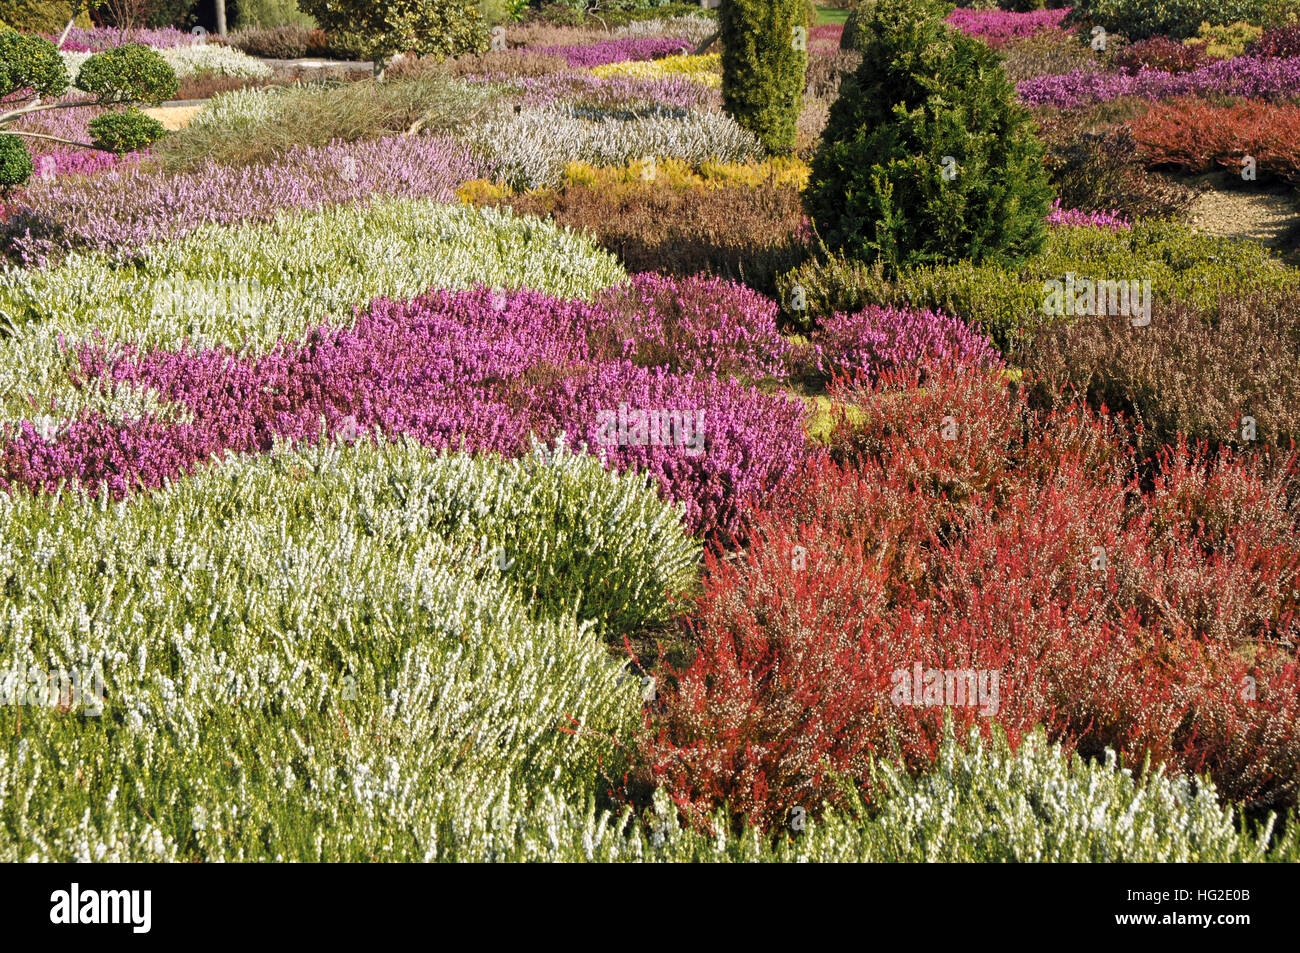 Heather garden with different flowering heathers and some confers Stock Photo